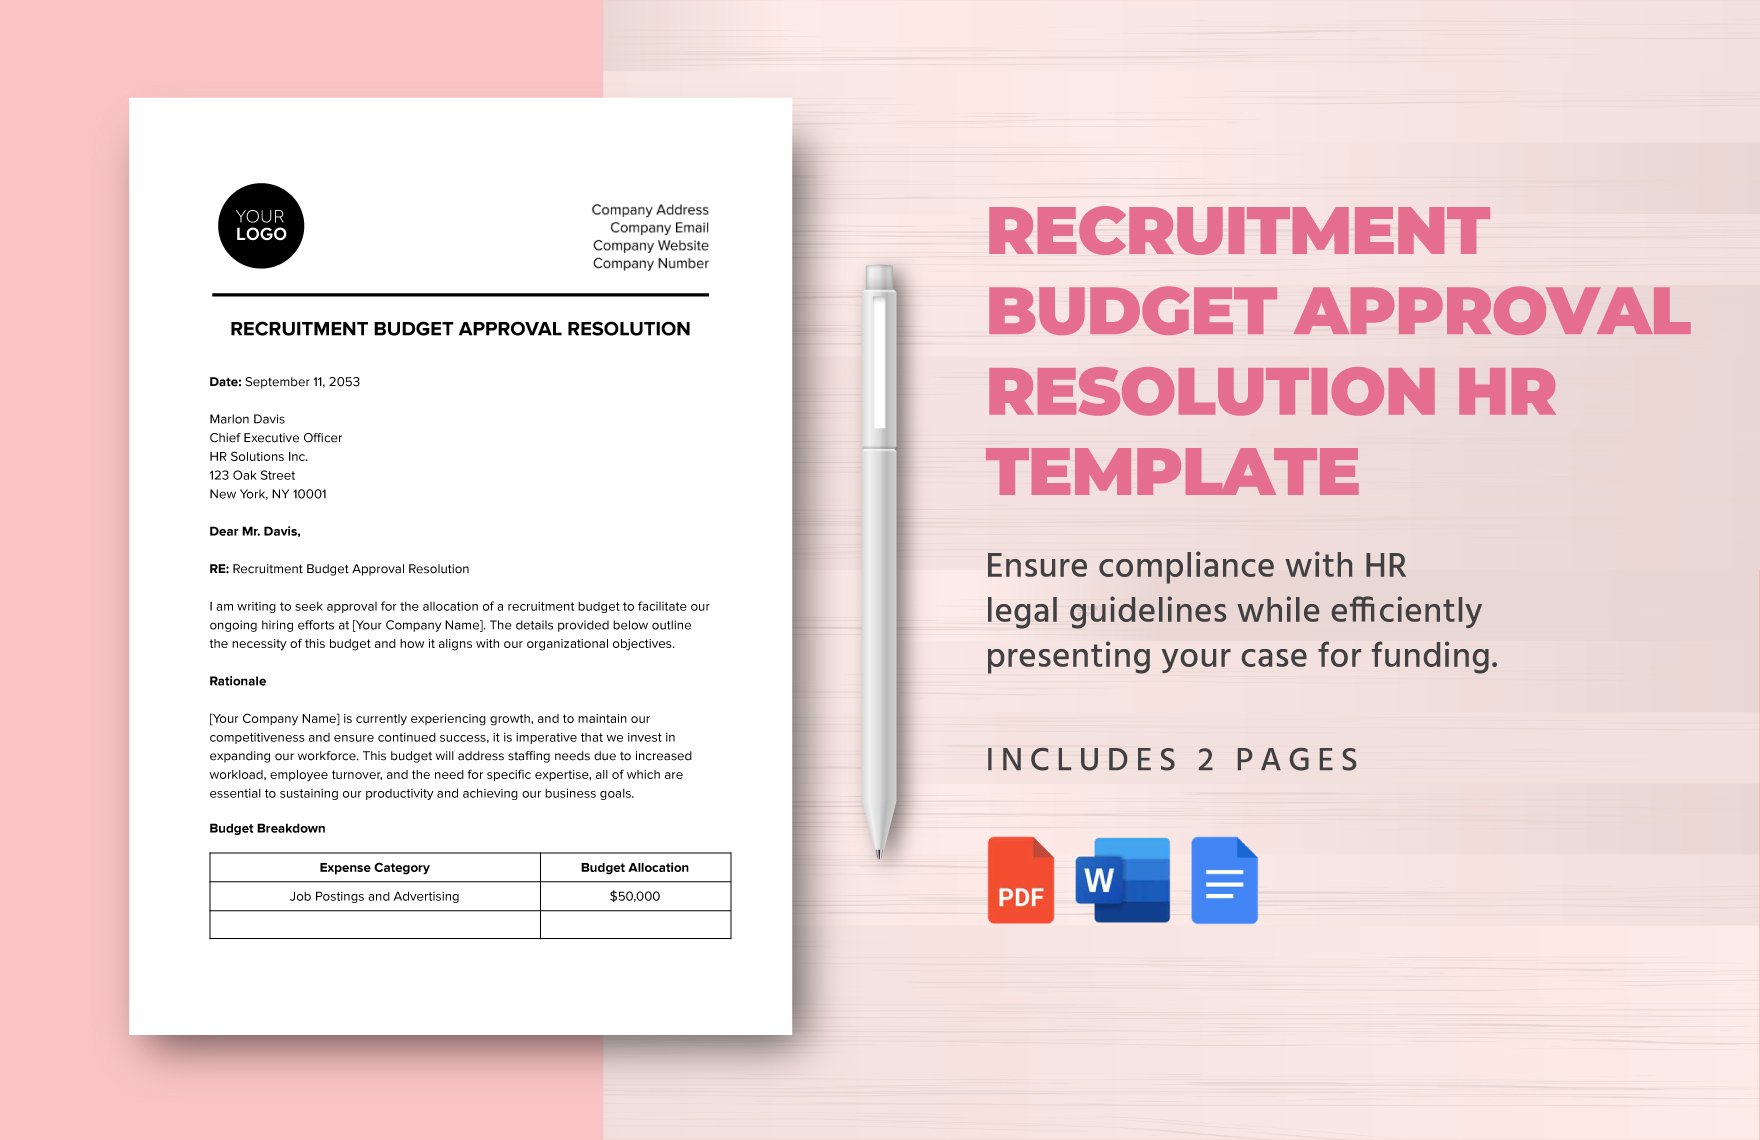 Recruitment Budget Approval Resolution HR Template